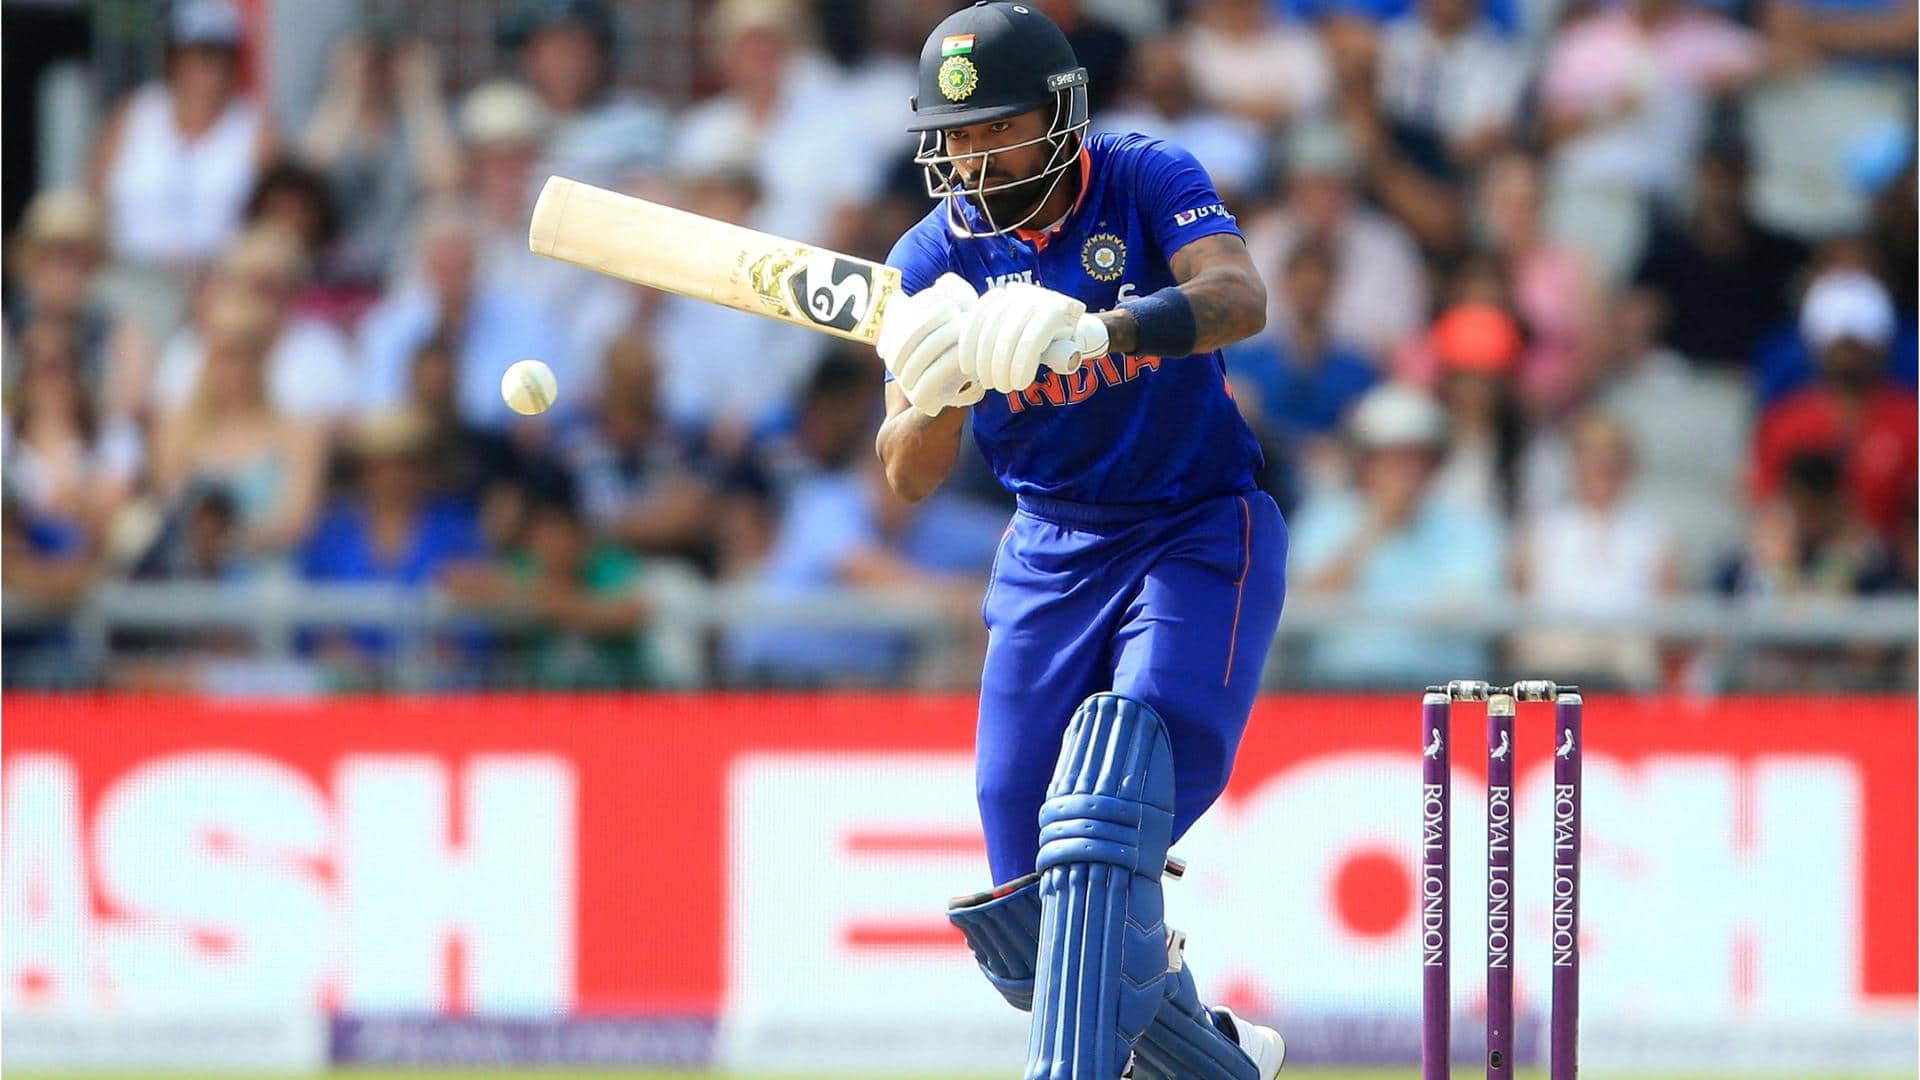 Should Pandya be India's full-time T20I skipper? Shastri shares opinion